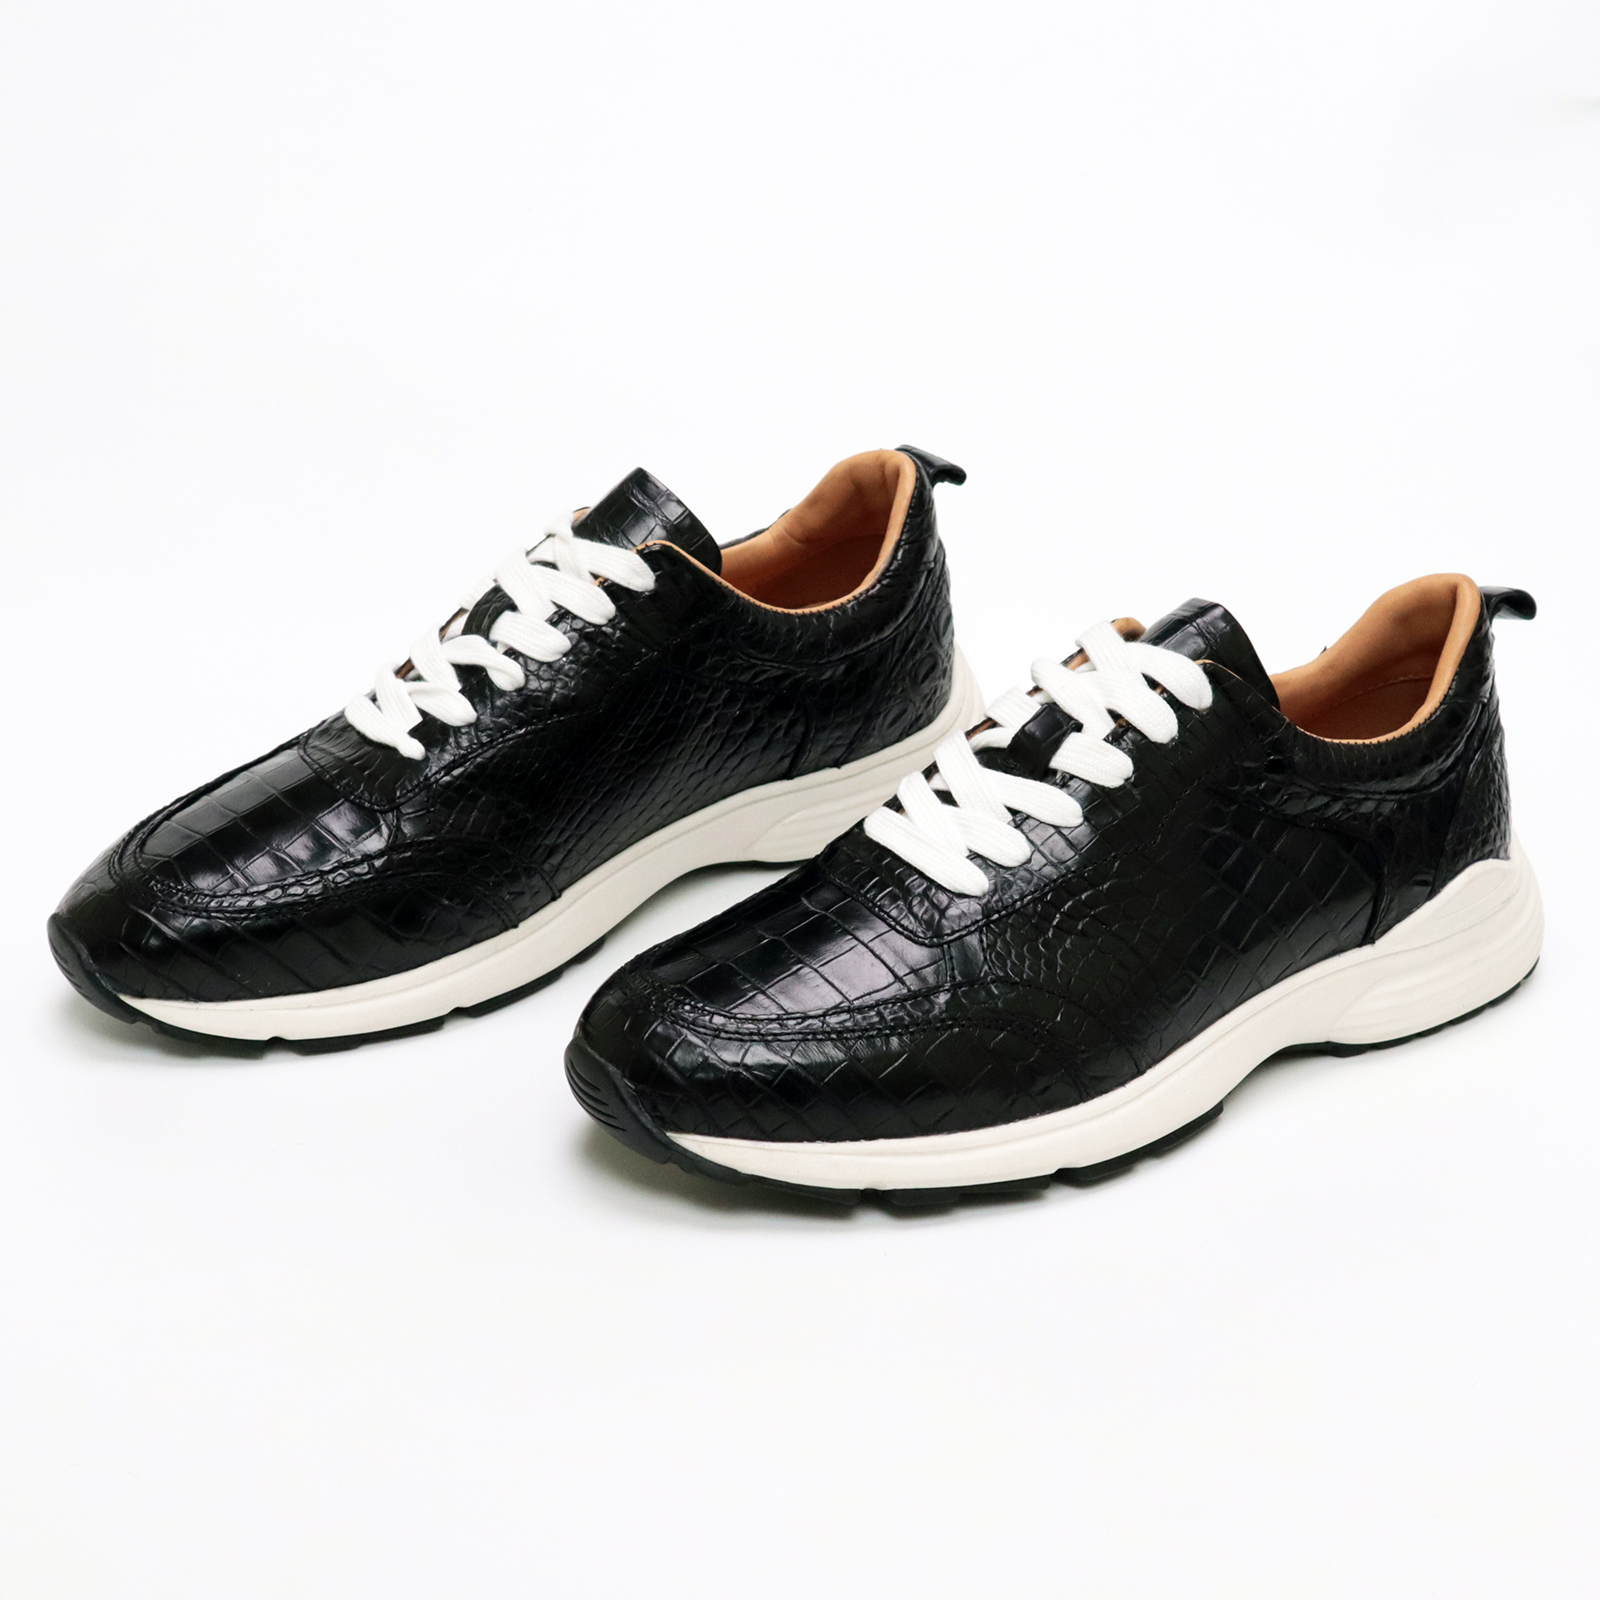 Sneaker Crocodile Leather Classic Formal Sporty Shoes for Men